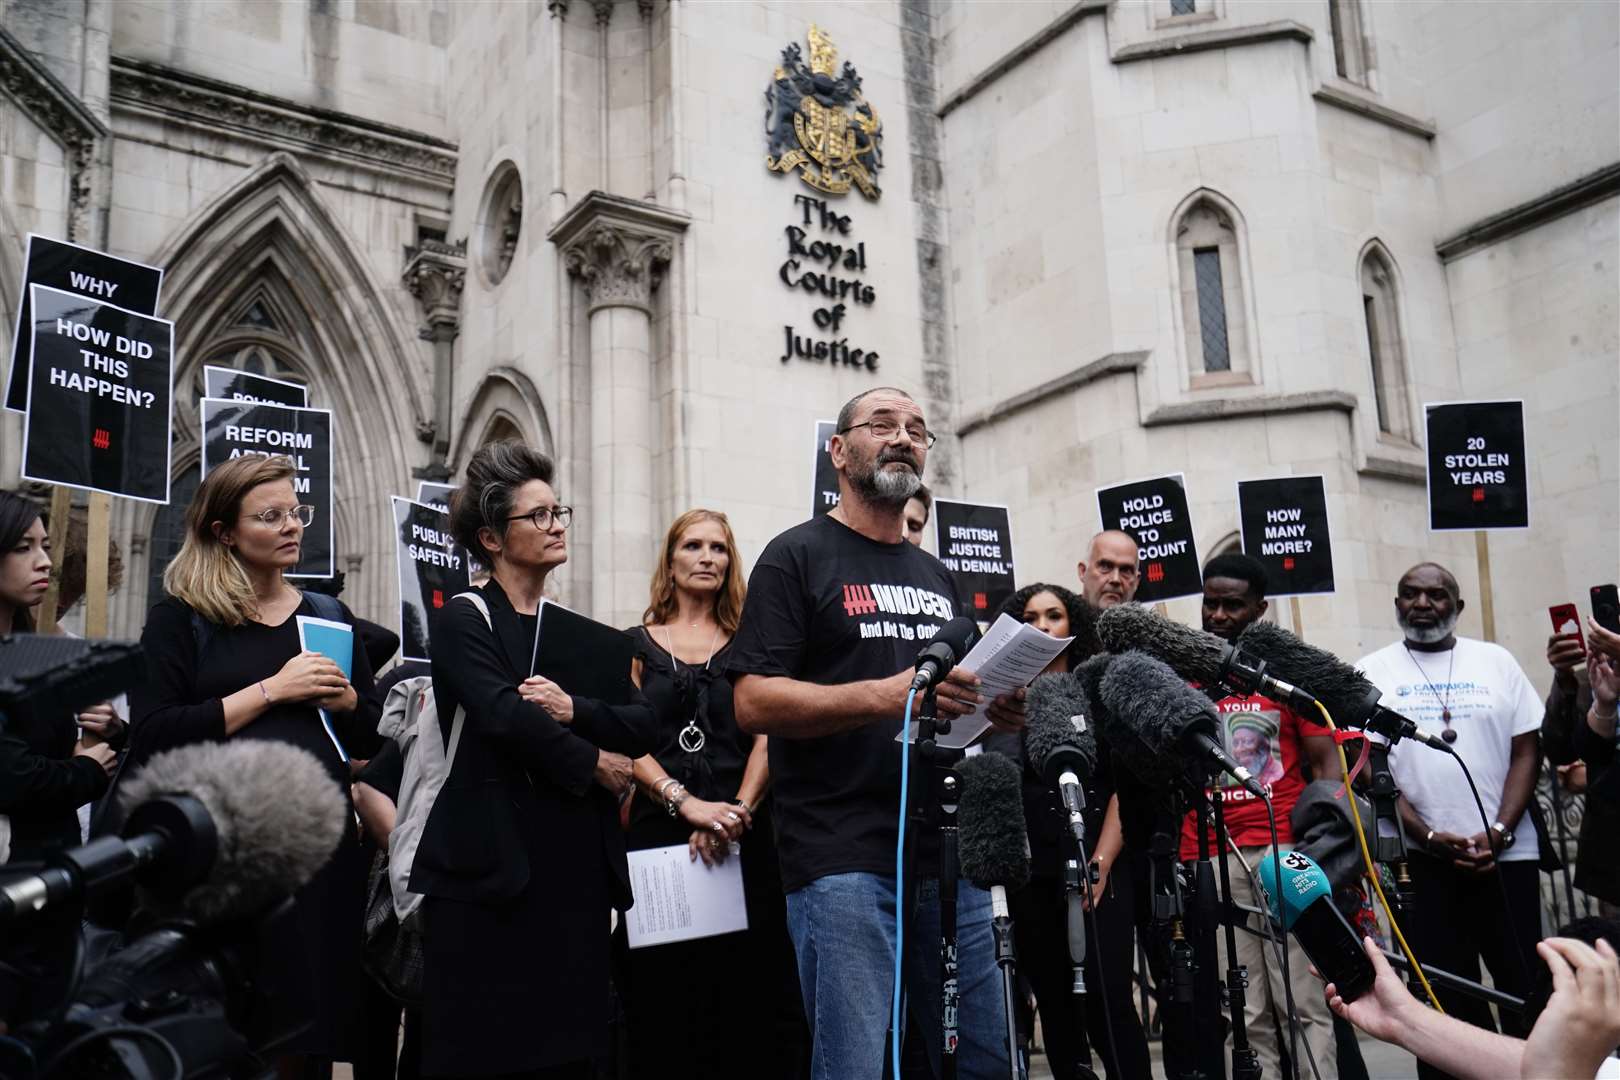 Andrew Malkinson, who served 17 years in prison for a rape he did not commit, reads a statement outside the Royal Courts of Justice in London after being cleared by the Court of Appeal (Jordan Pettitt/PA)